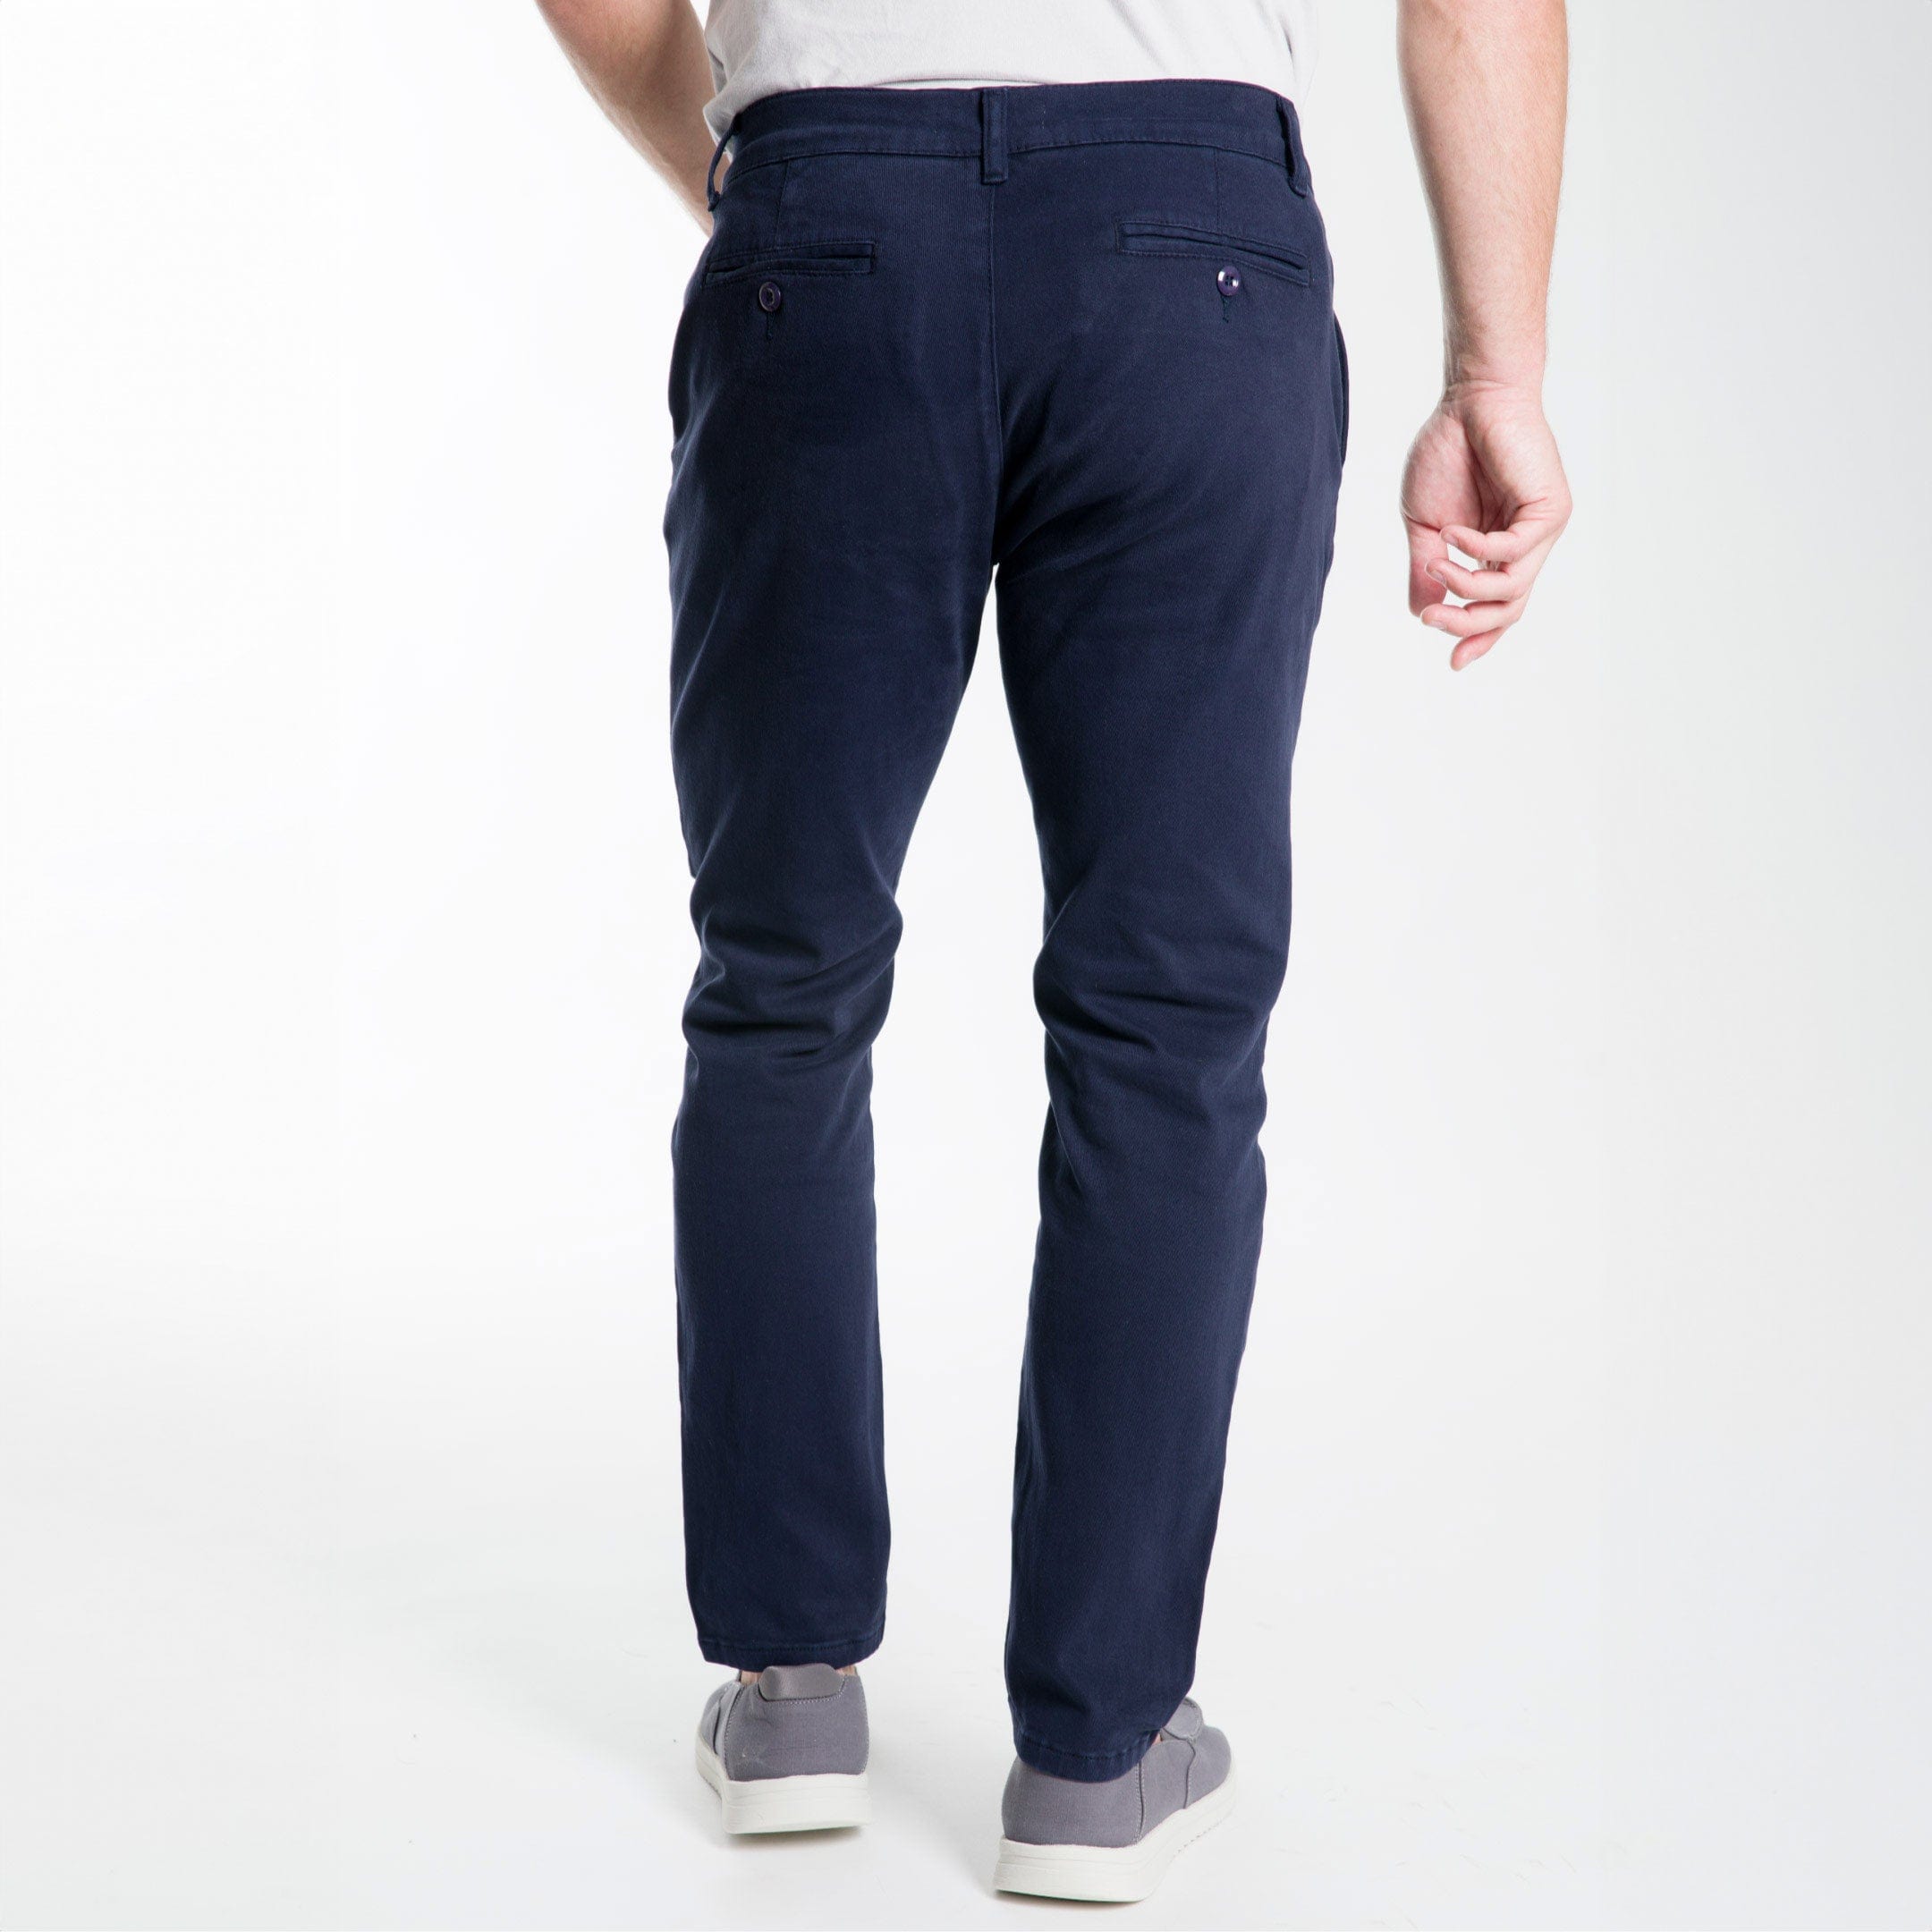 Ash & Erie Navy Washed Stretch Chinos for Short Men   Chino Pants